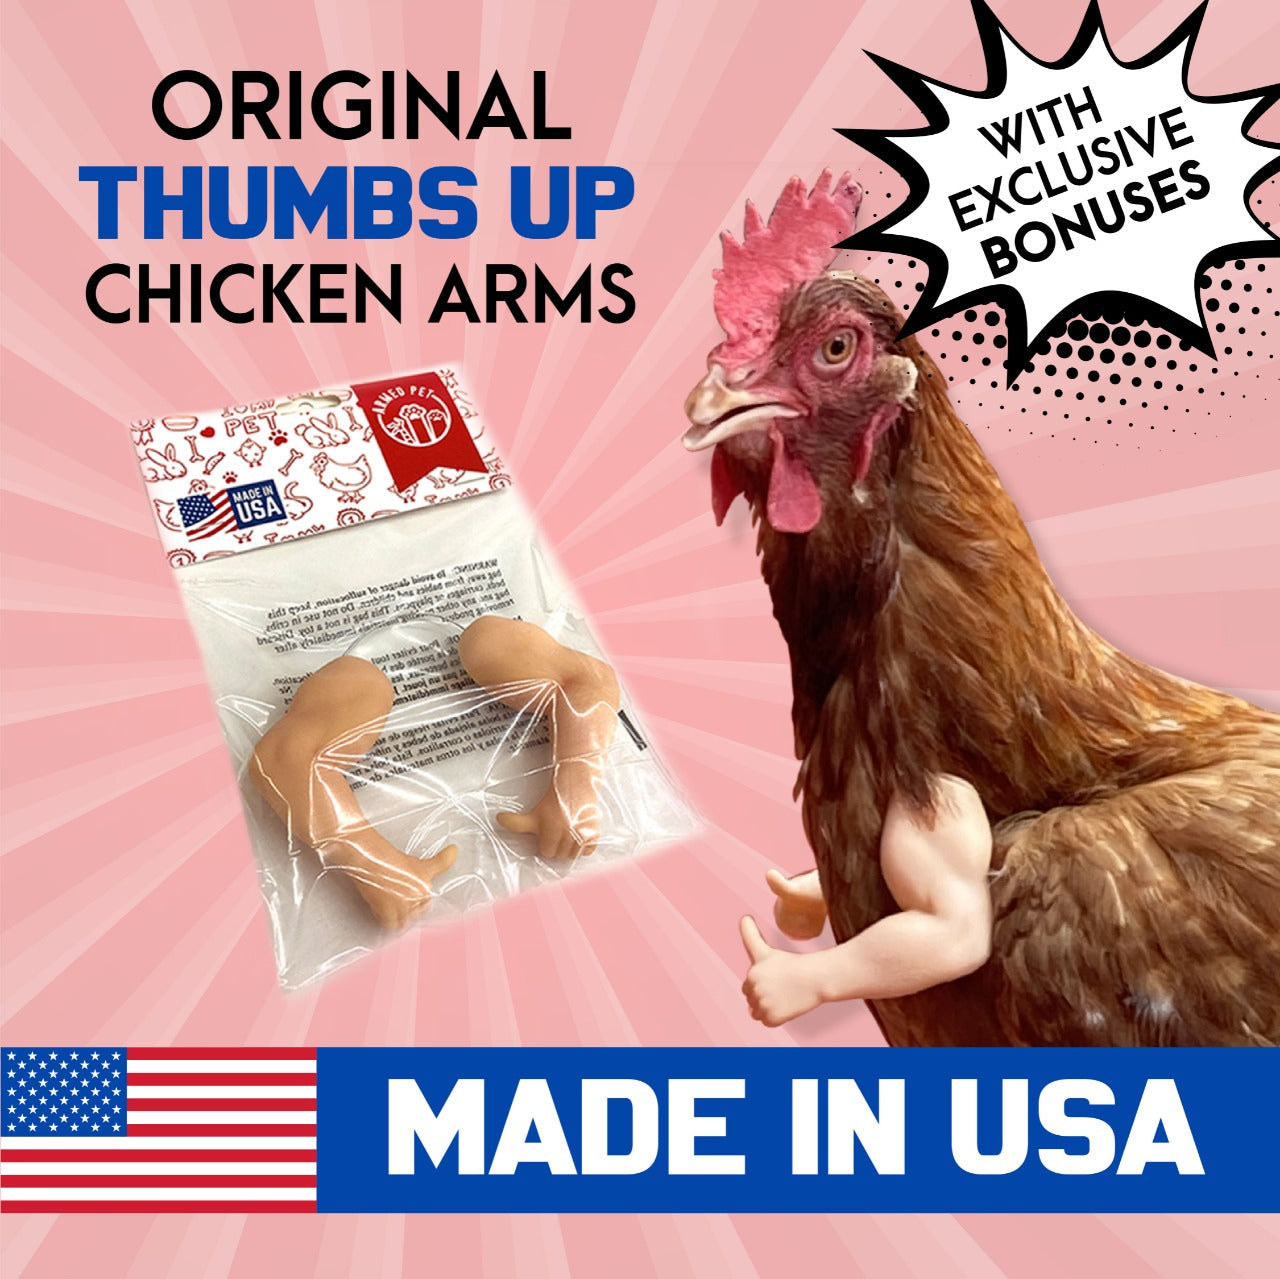 Thumbs Up Chicken Arms Made in Texas USA Meme Positive Alright Chicken - GoodBuy.ai